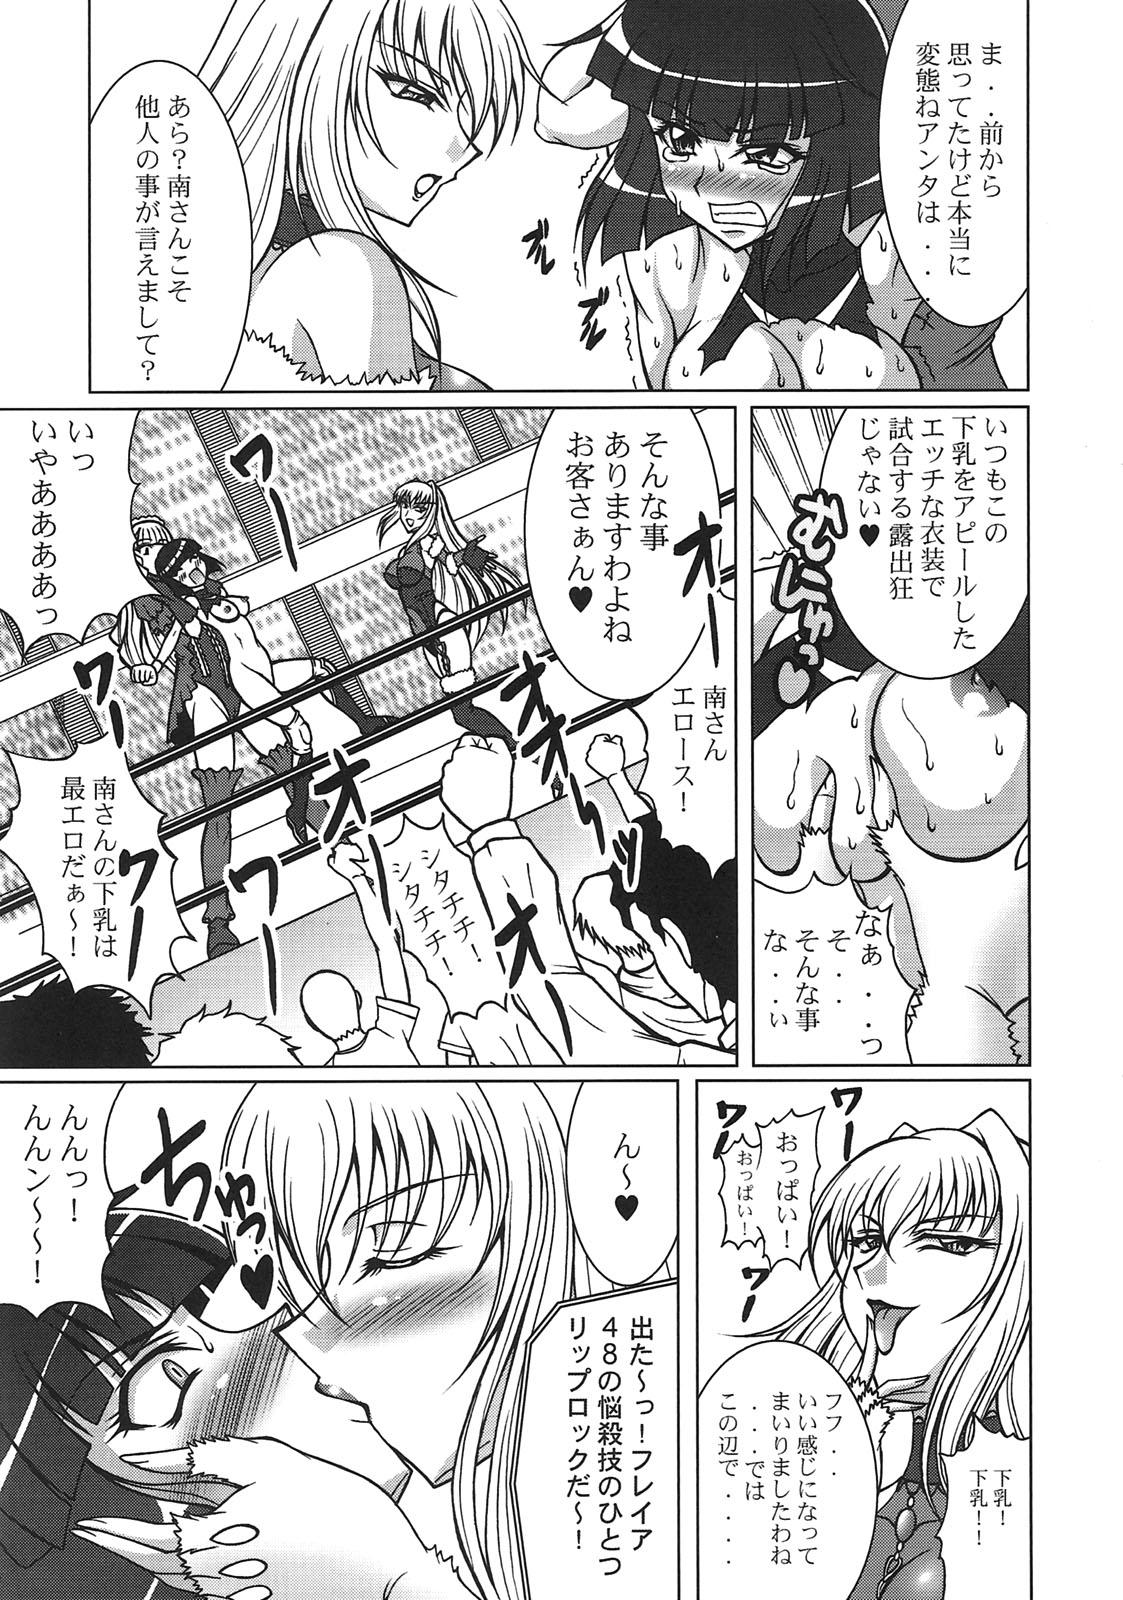 Cumshot THE WRESTLE M@STER - Wrestle angels Free - Page 8